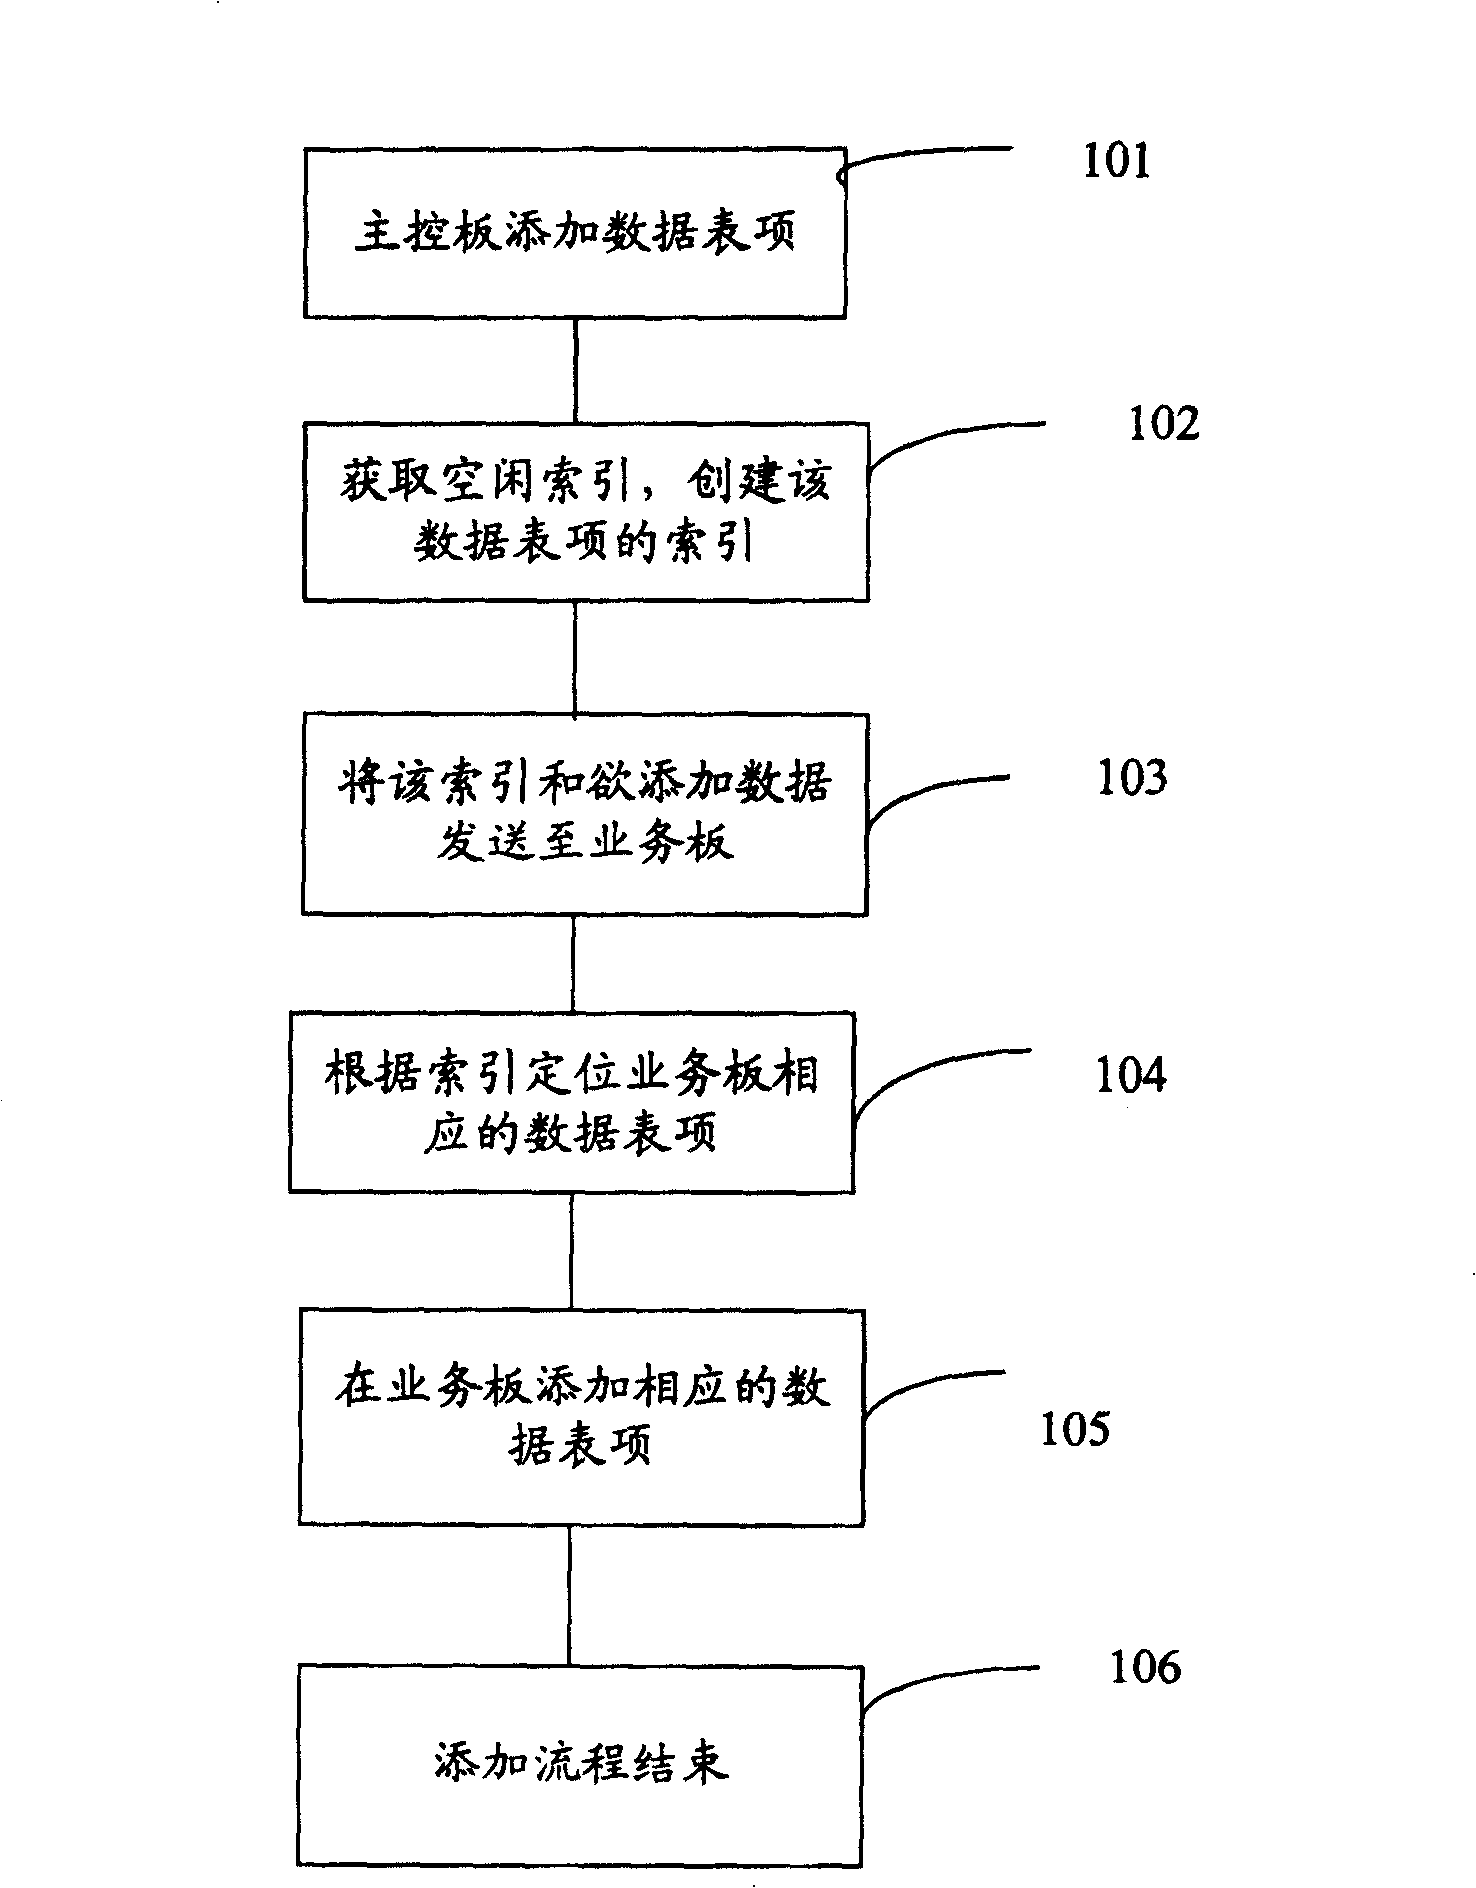 Method of data query and method of inter-board data synchronization in distributed system